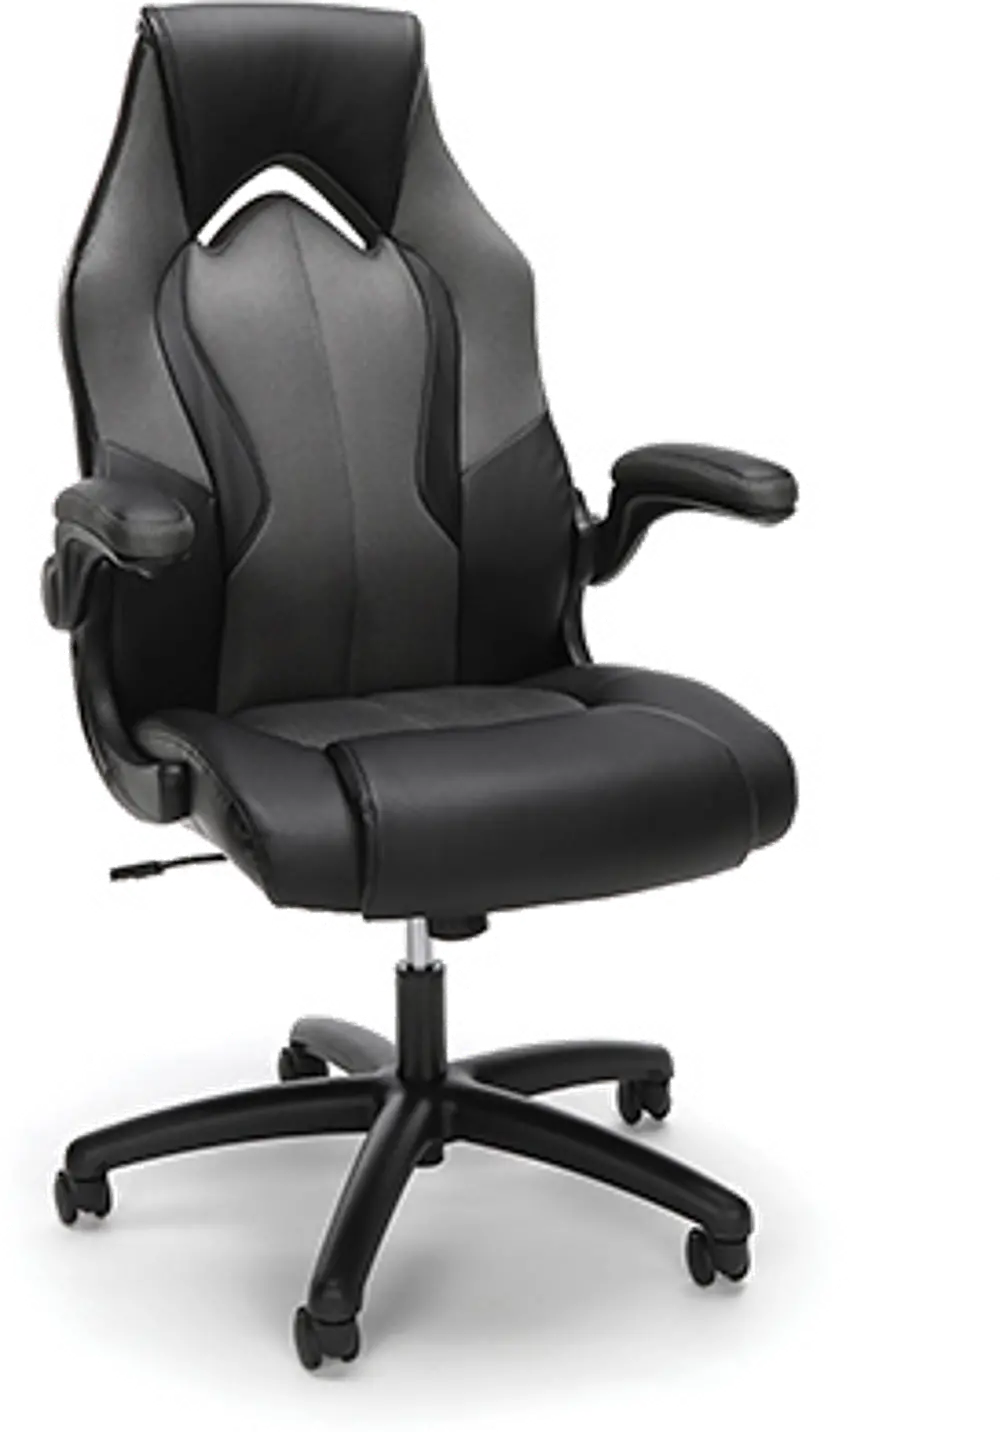 Gray and Black Leather Gaming Chair - Essentials-1